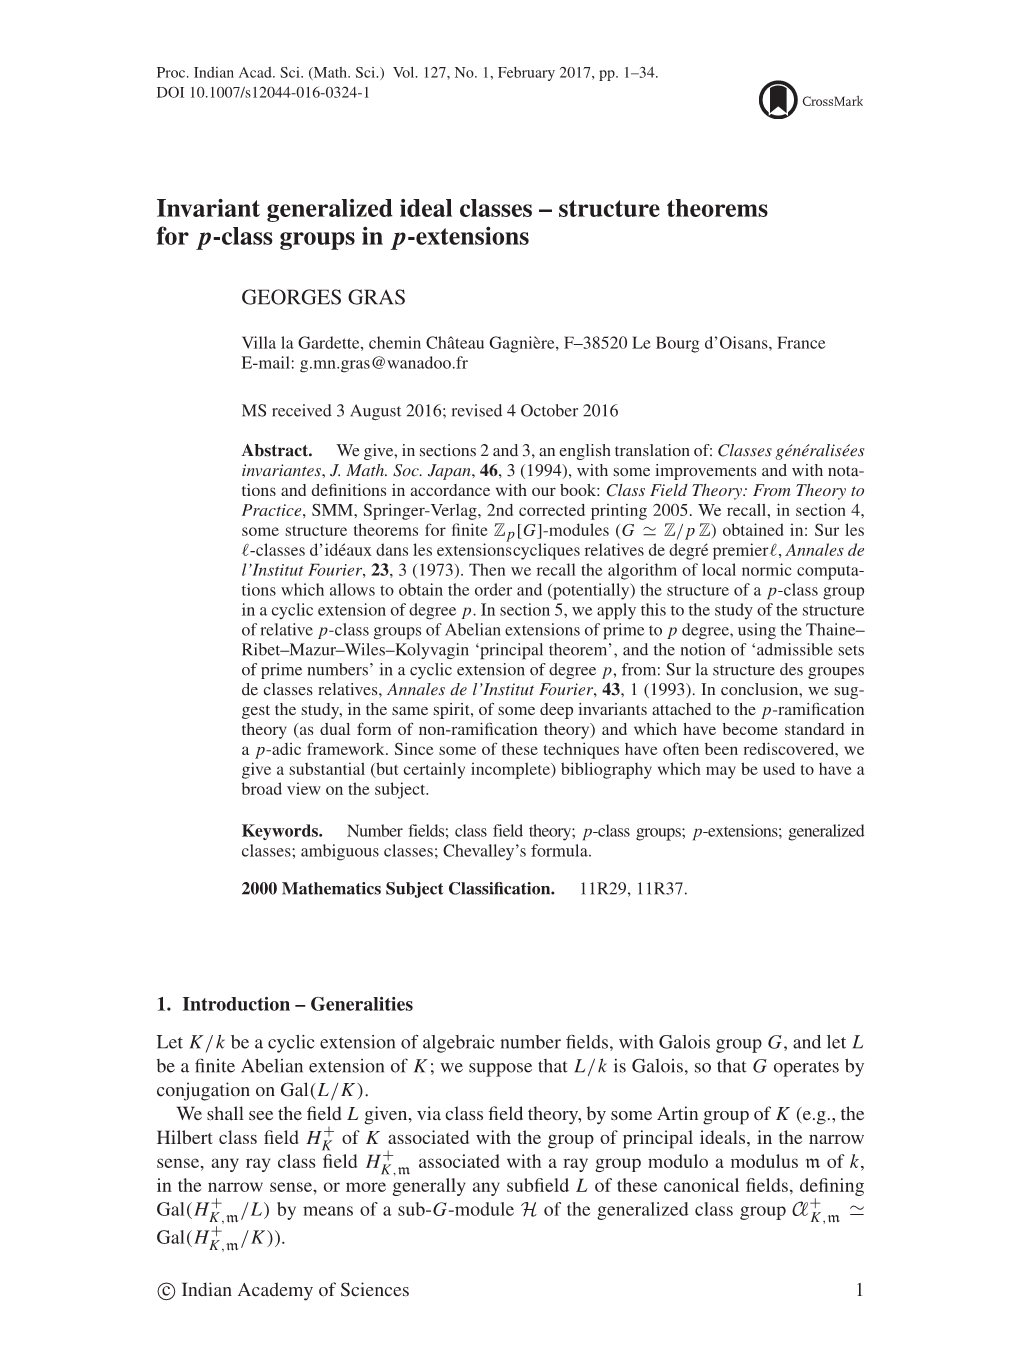 Invariant Generalized Ideal Classes – Structure Theorems for P-Class Groups in P-Extensions